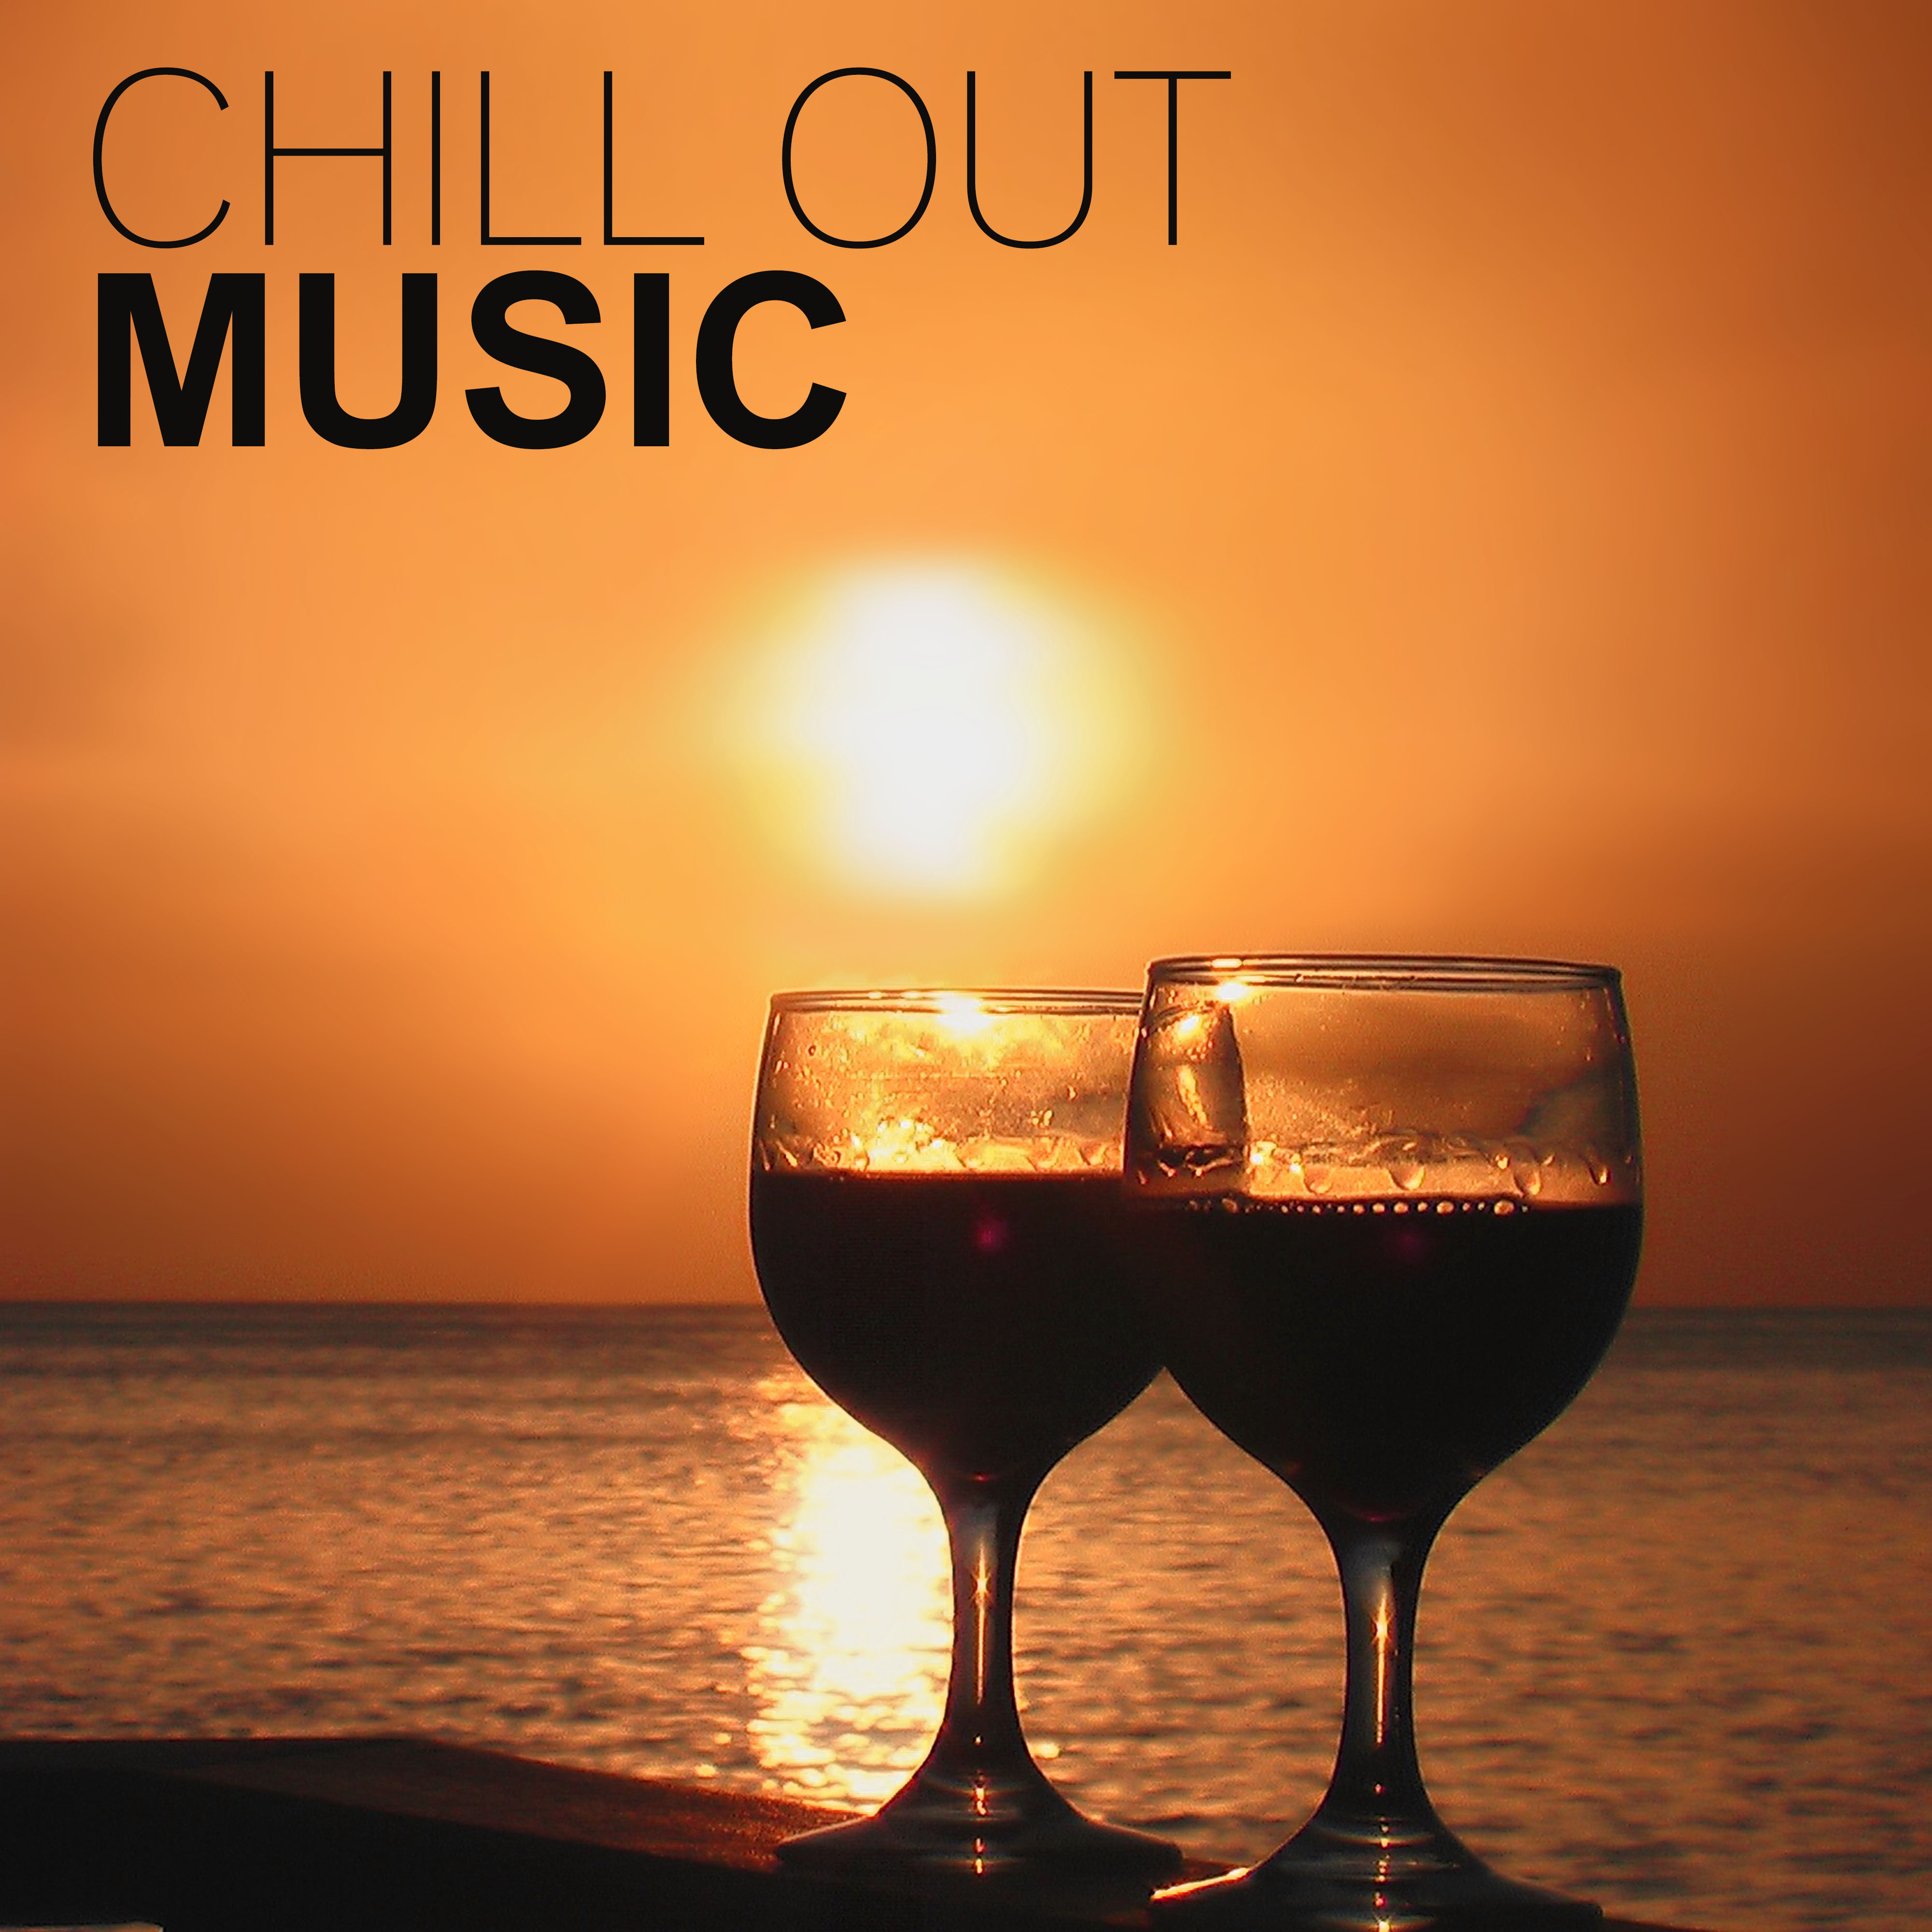 Chill Out Music – Chill Everyday and Everynight